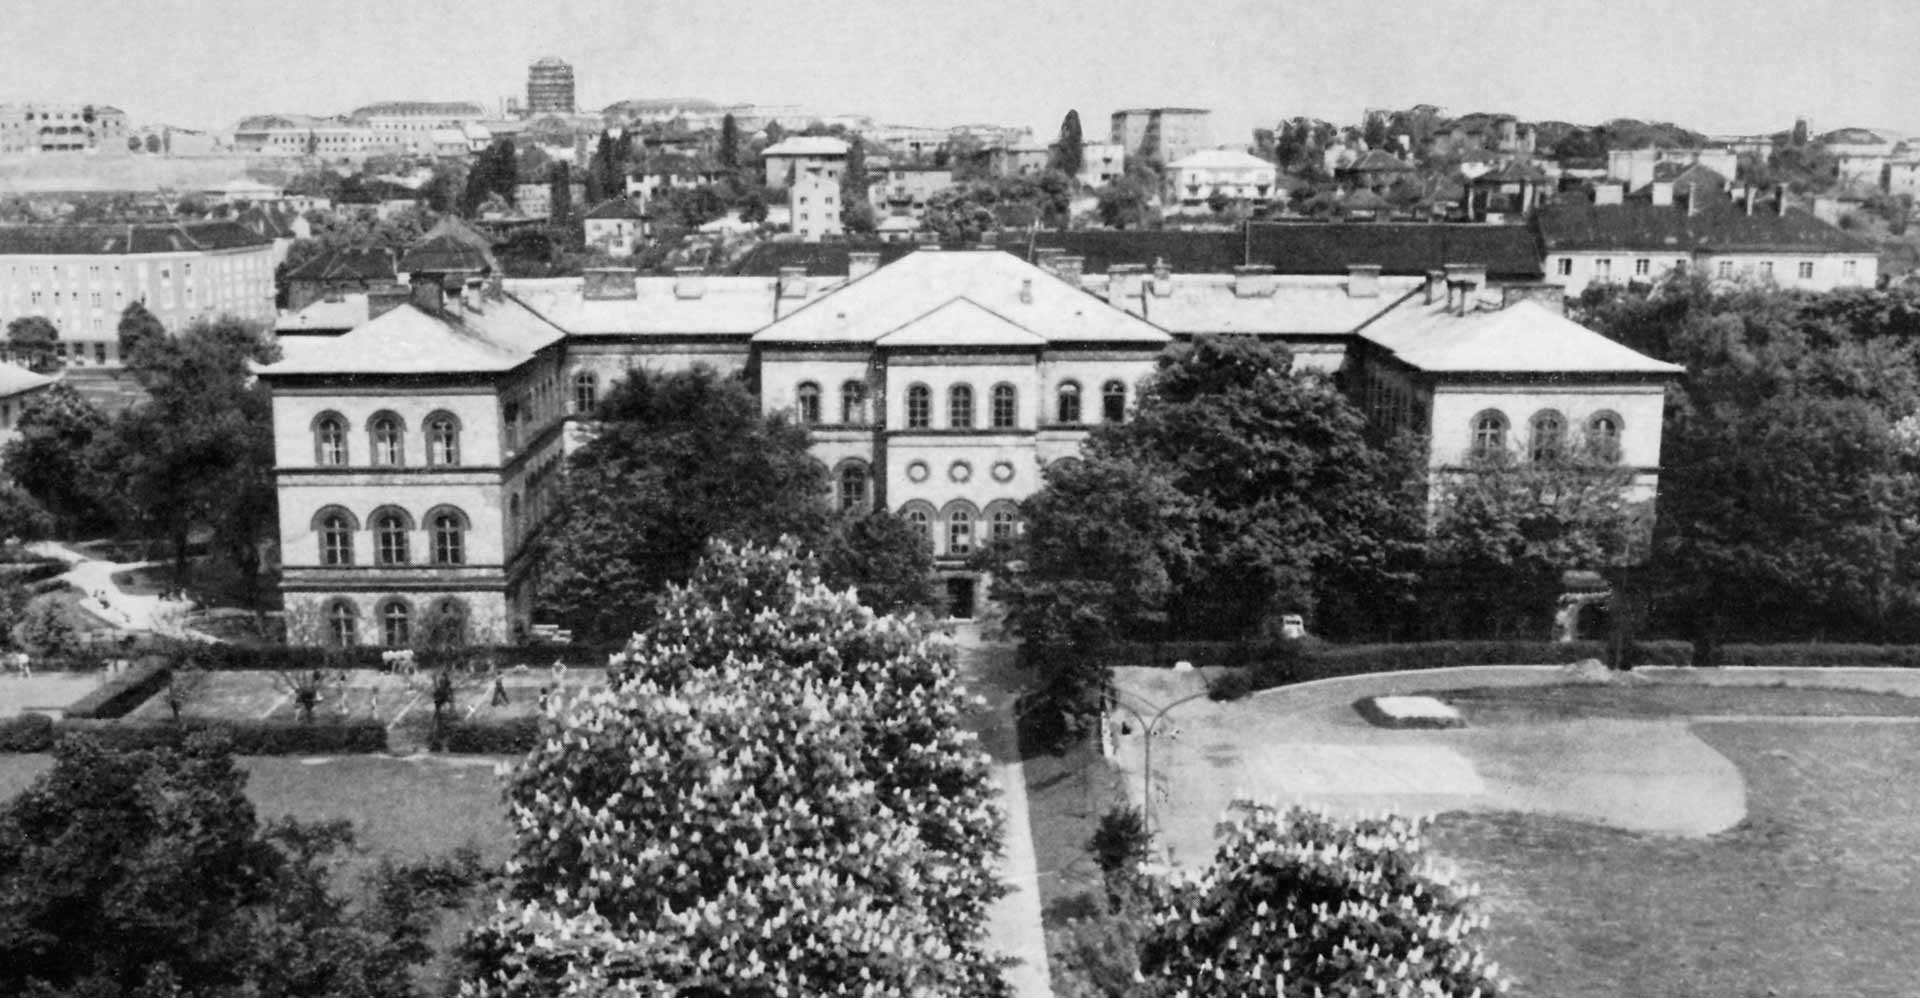 The main building of the University in 1925